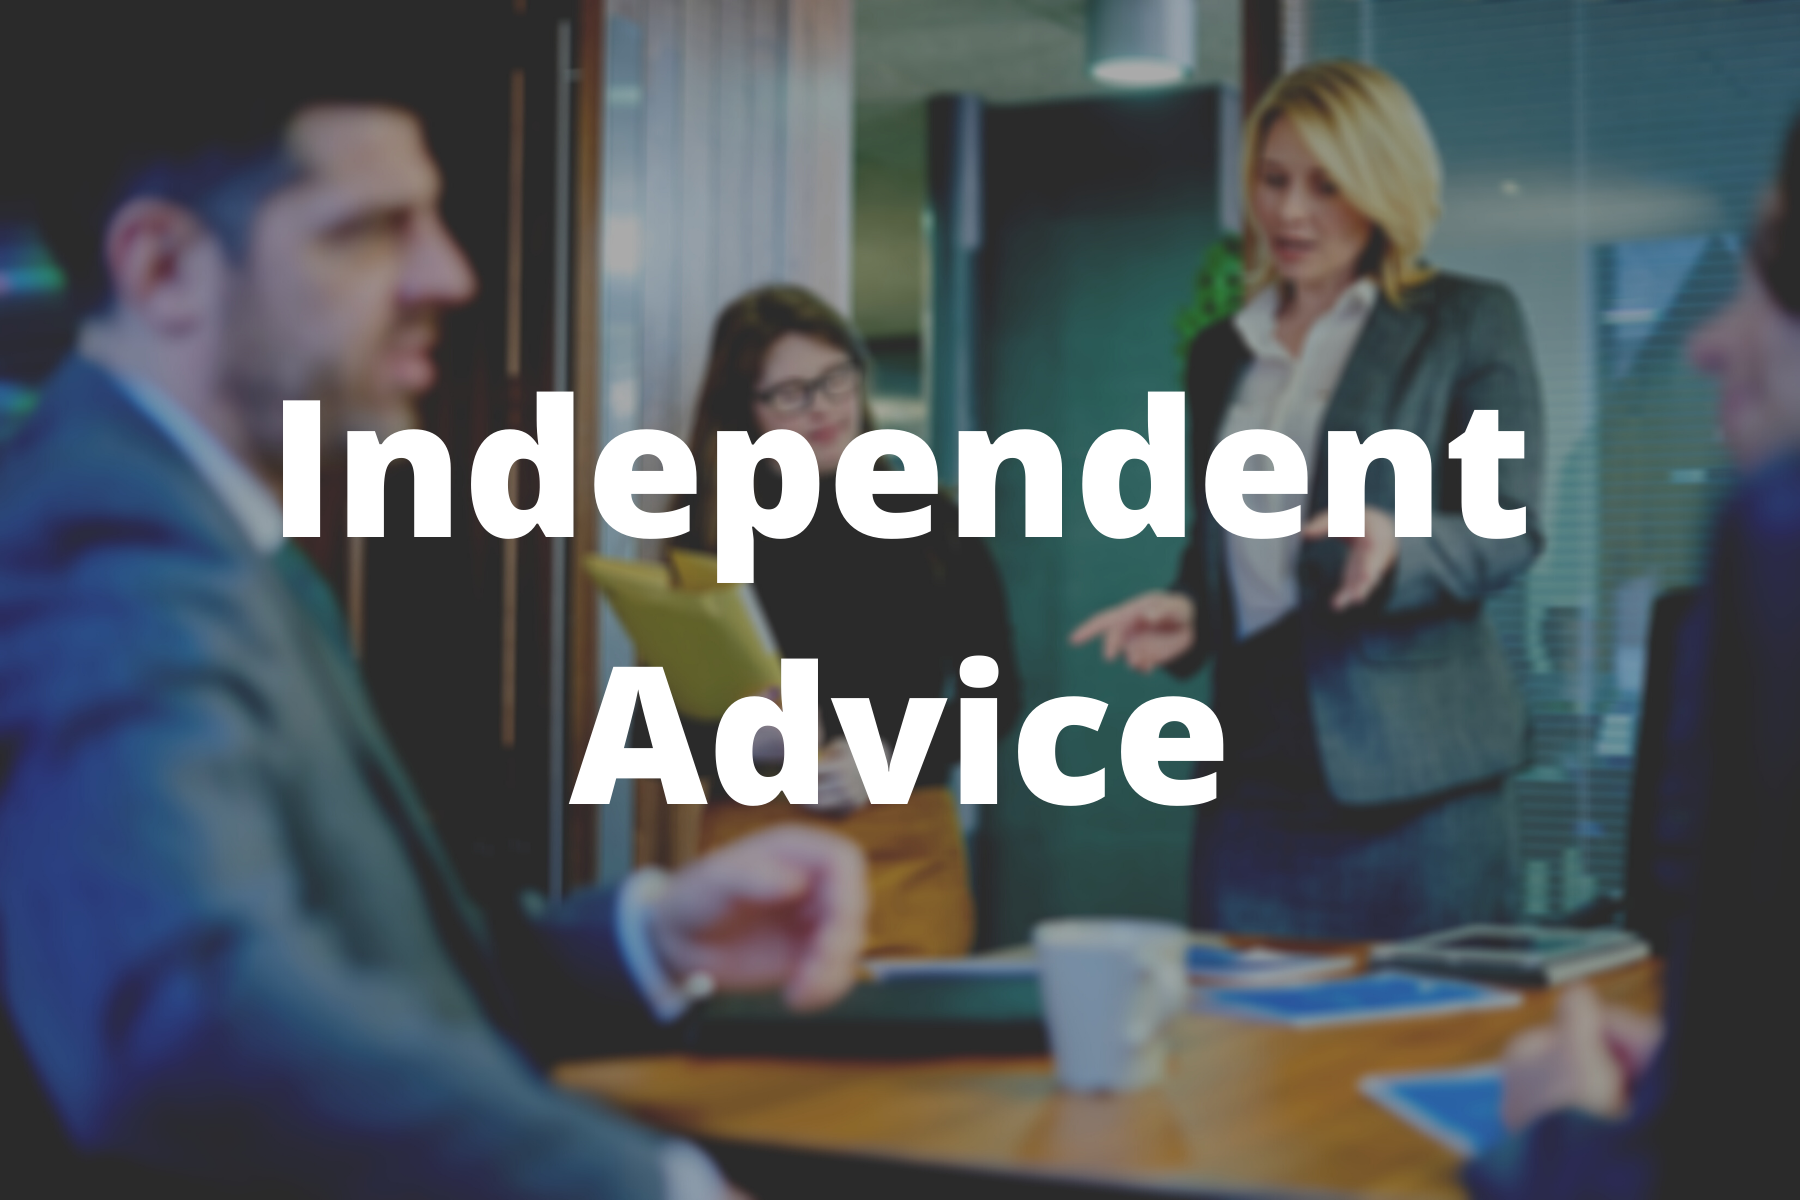 Independent advice